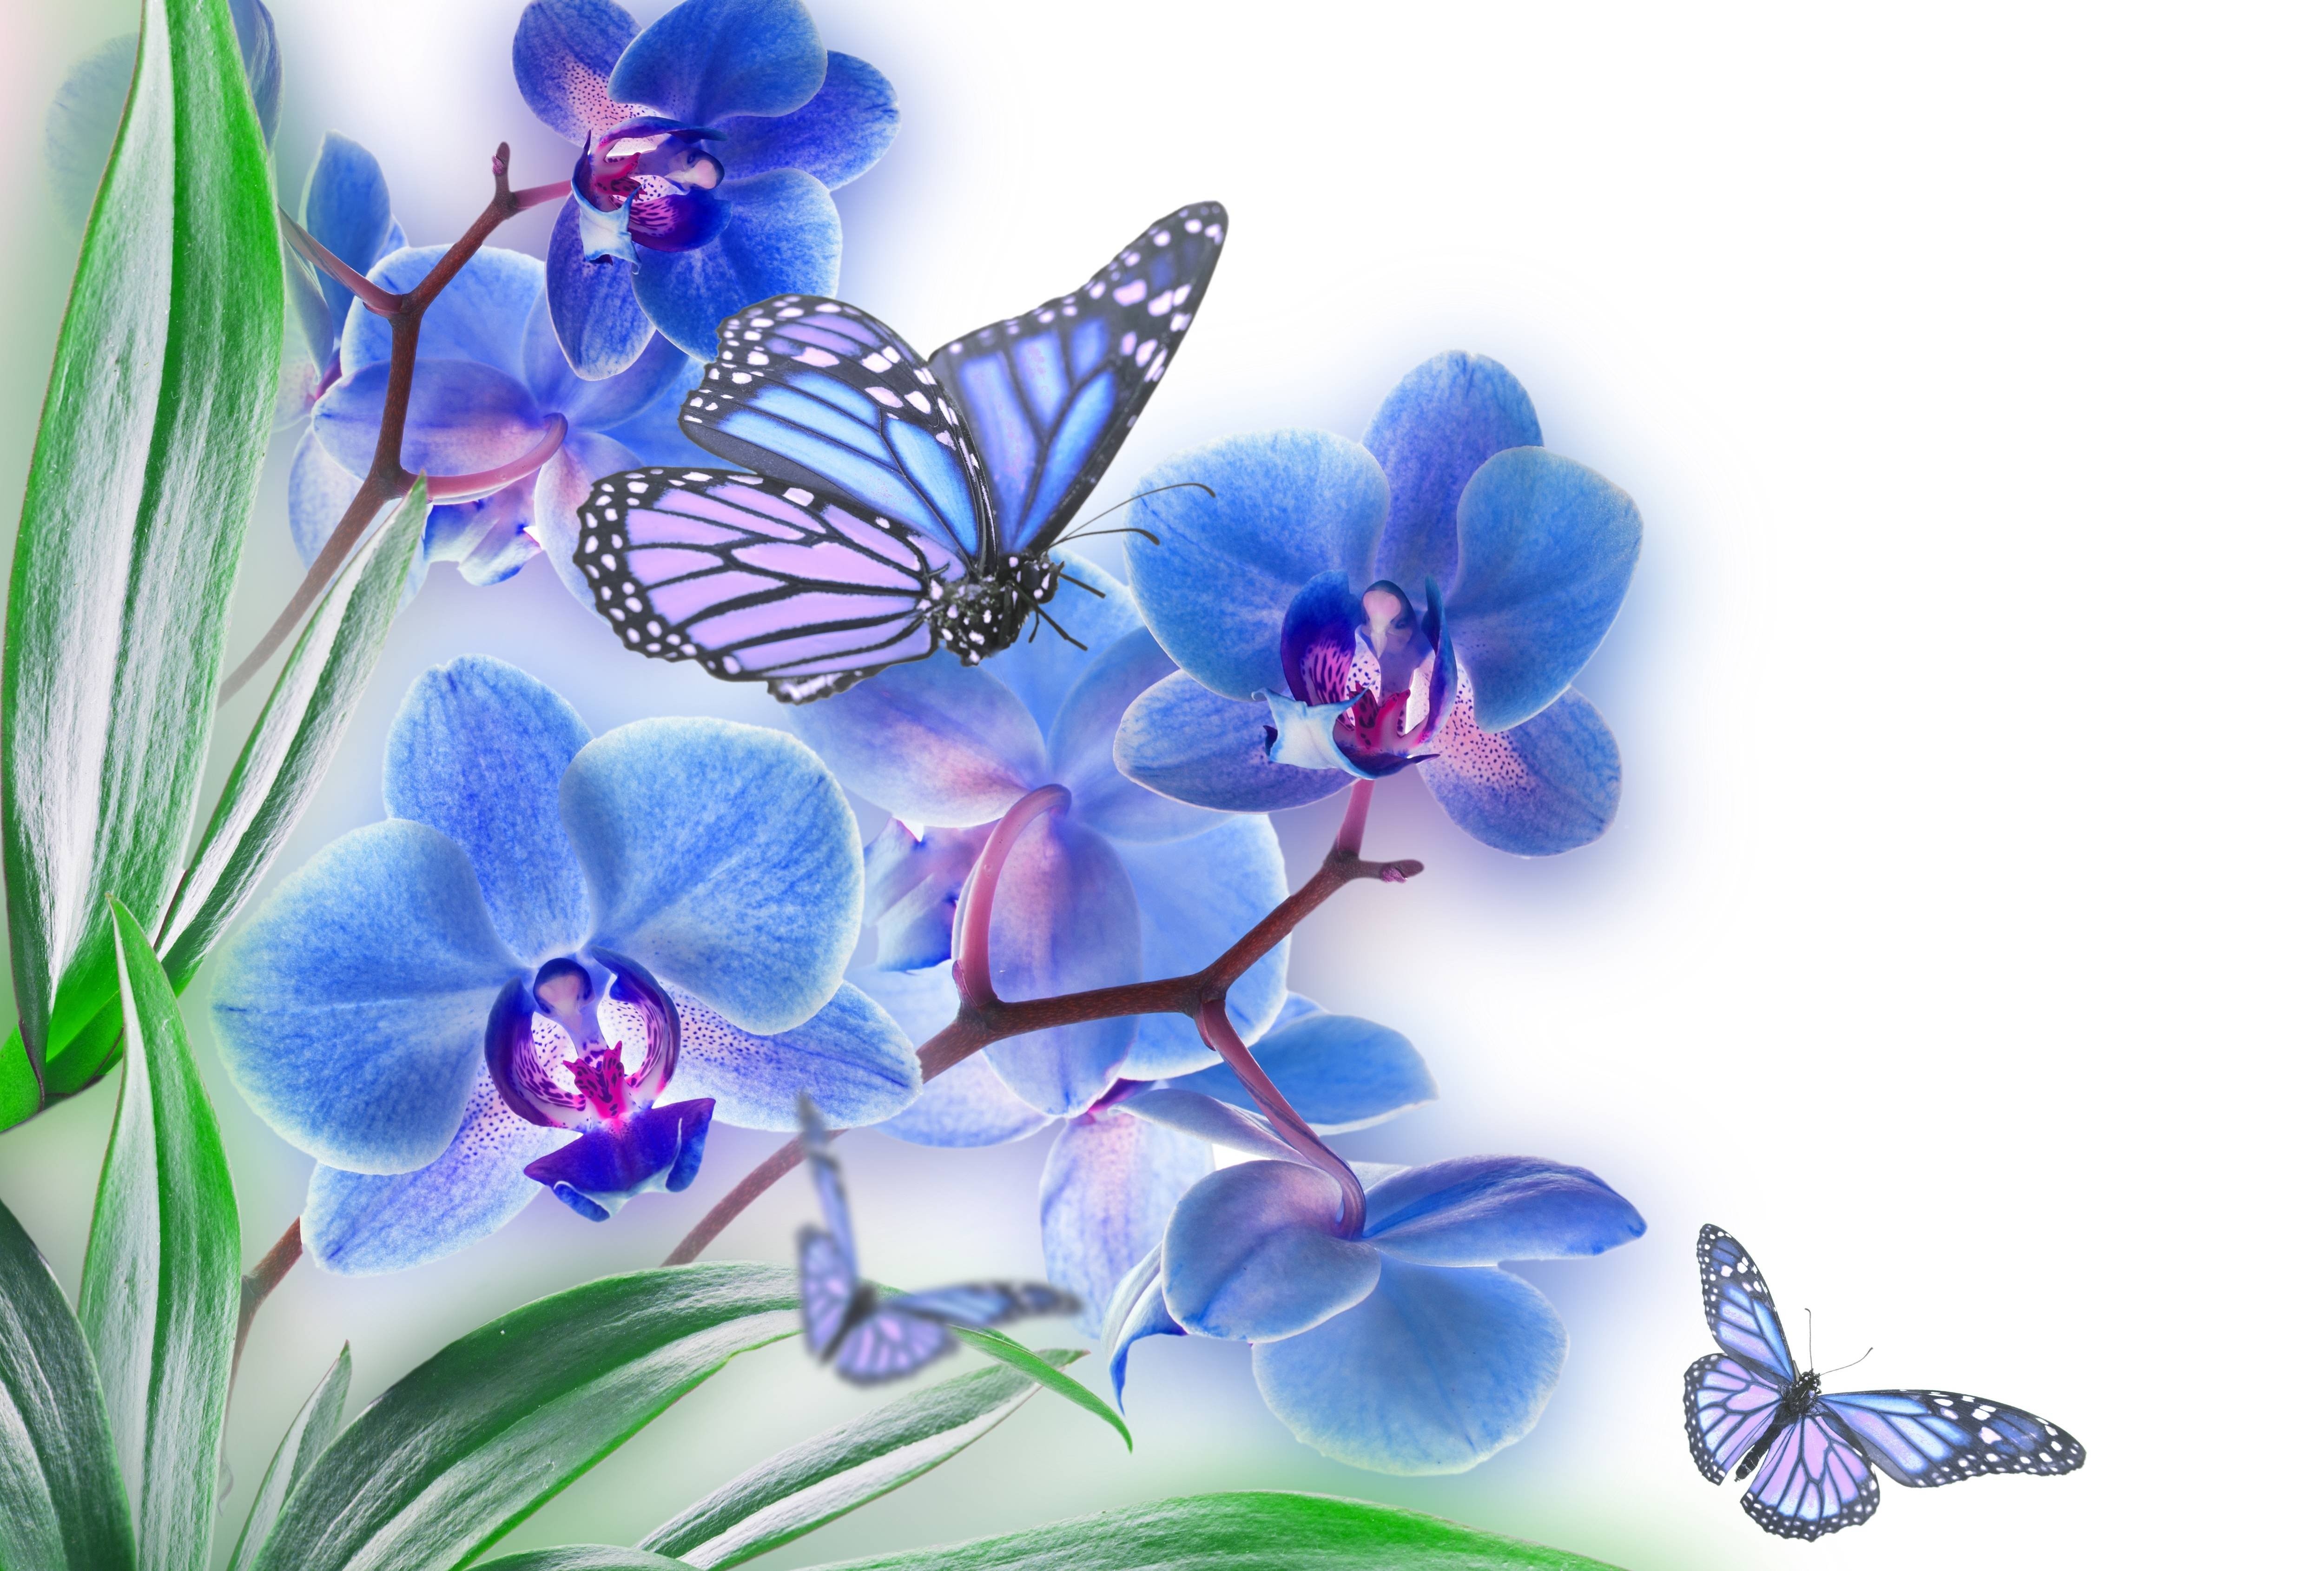 Pictures Of Flowers And Butterflies Download